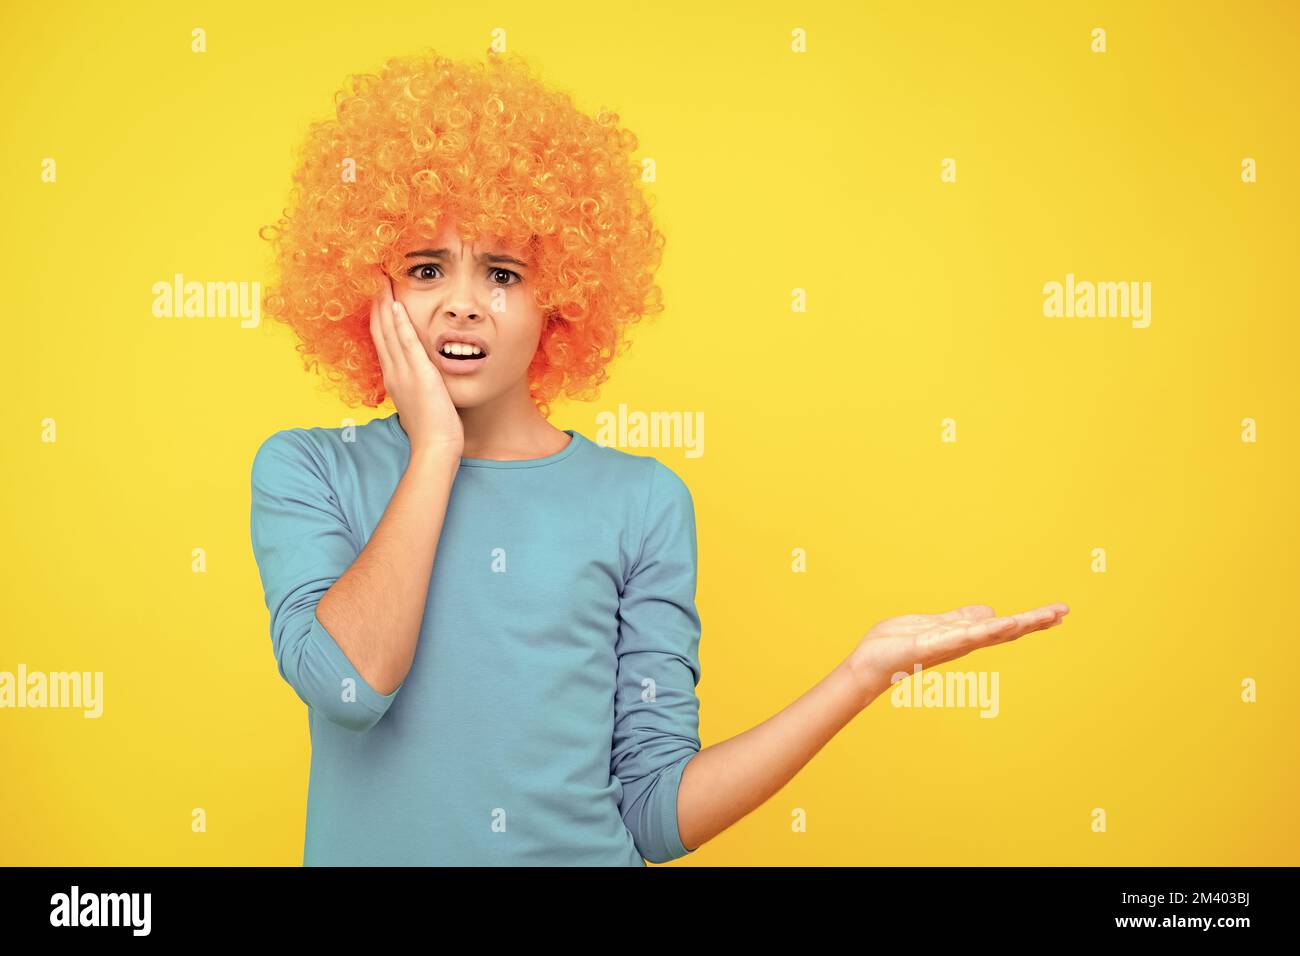 Funny kid in curly redhead wig. Time to have fun. Teen girl with orange hair, being a clown. Angry face, upset emotions of teenager girl. Stock Photo